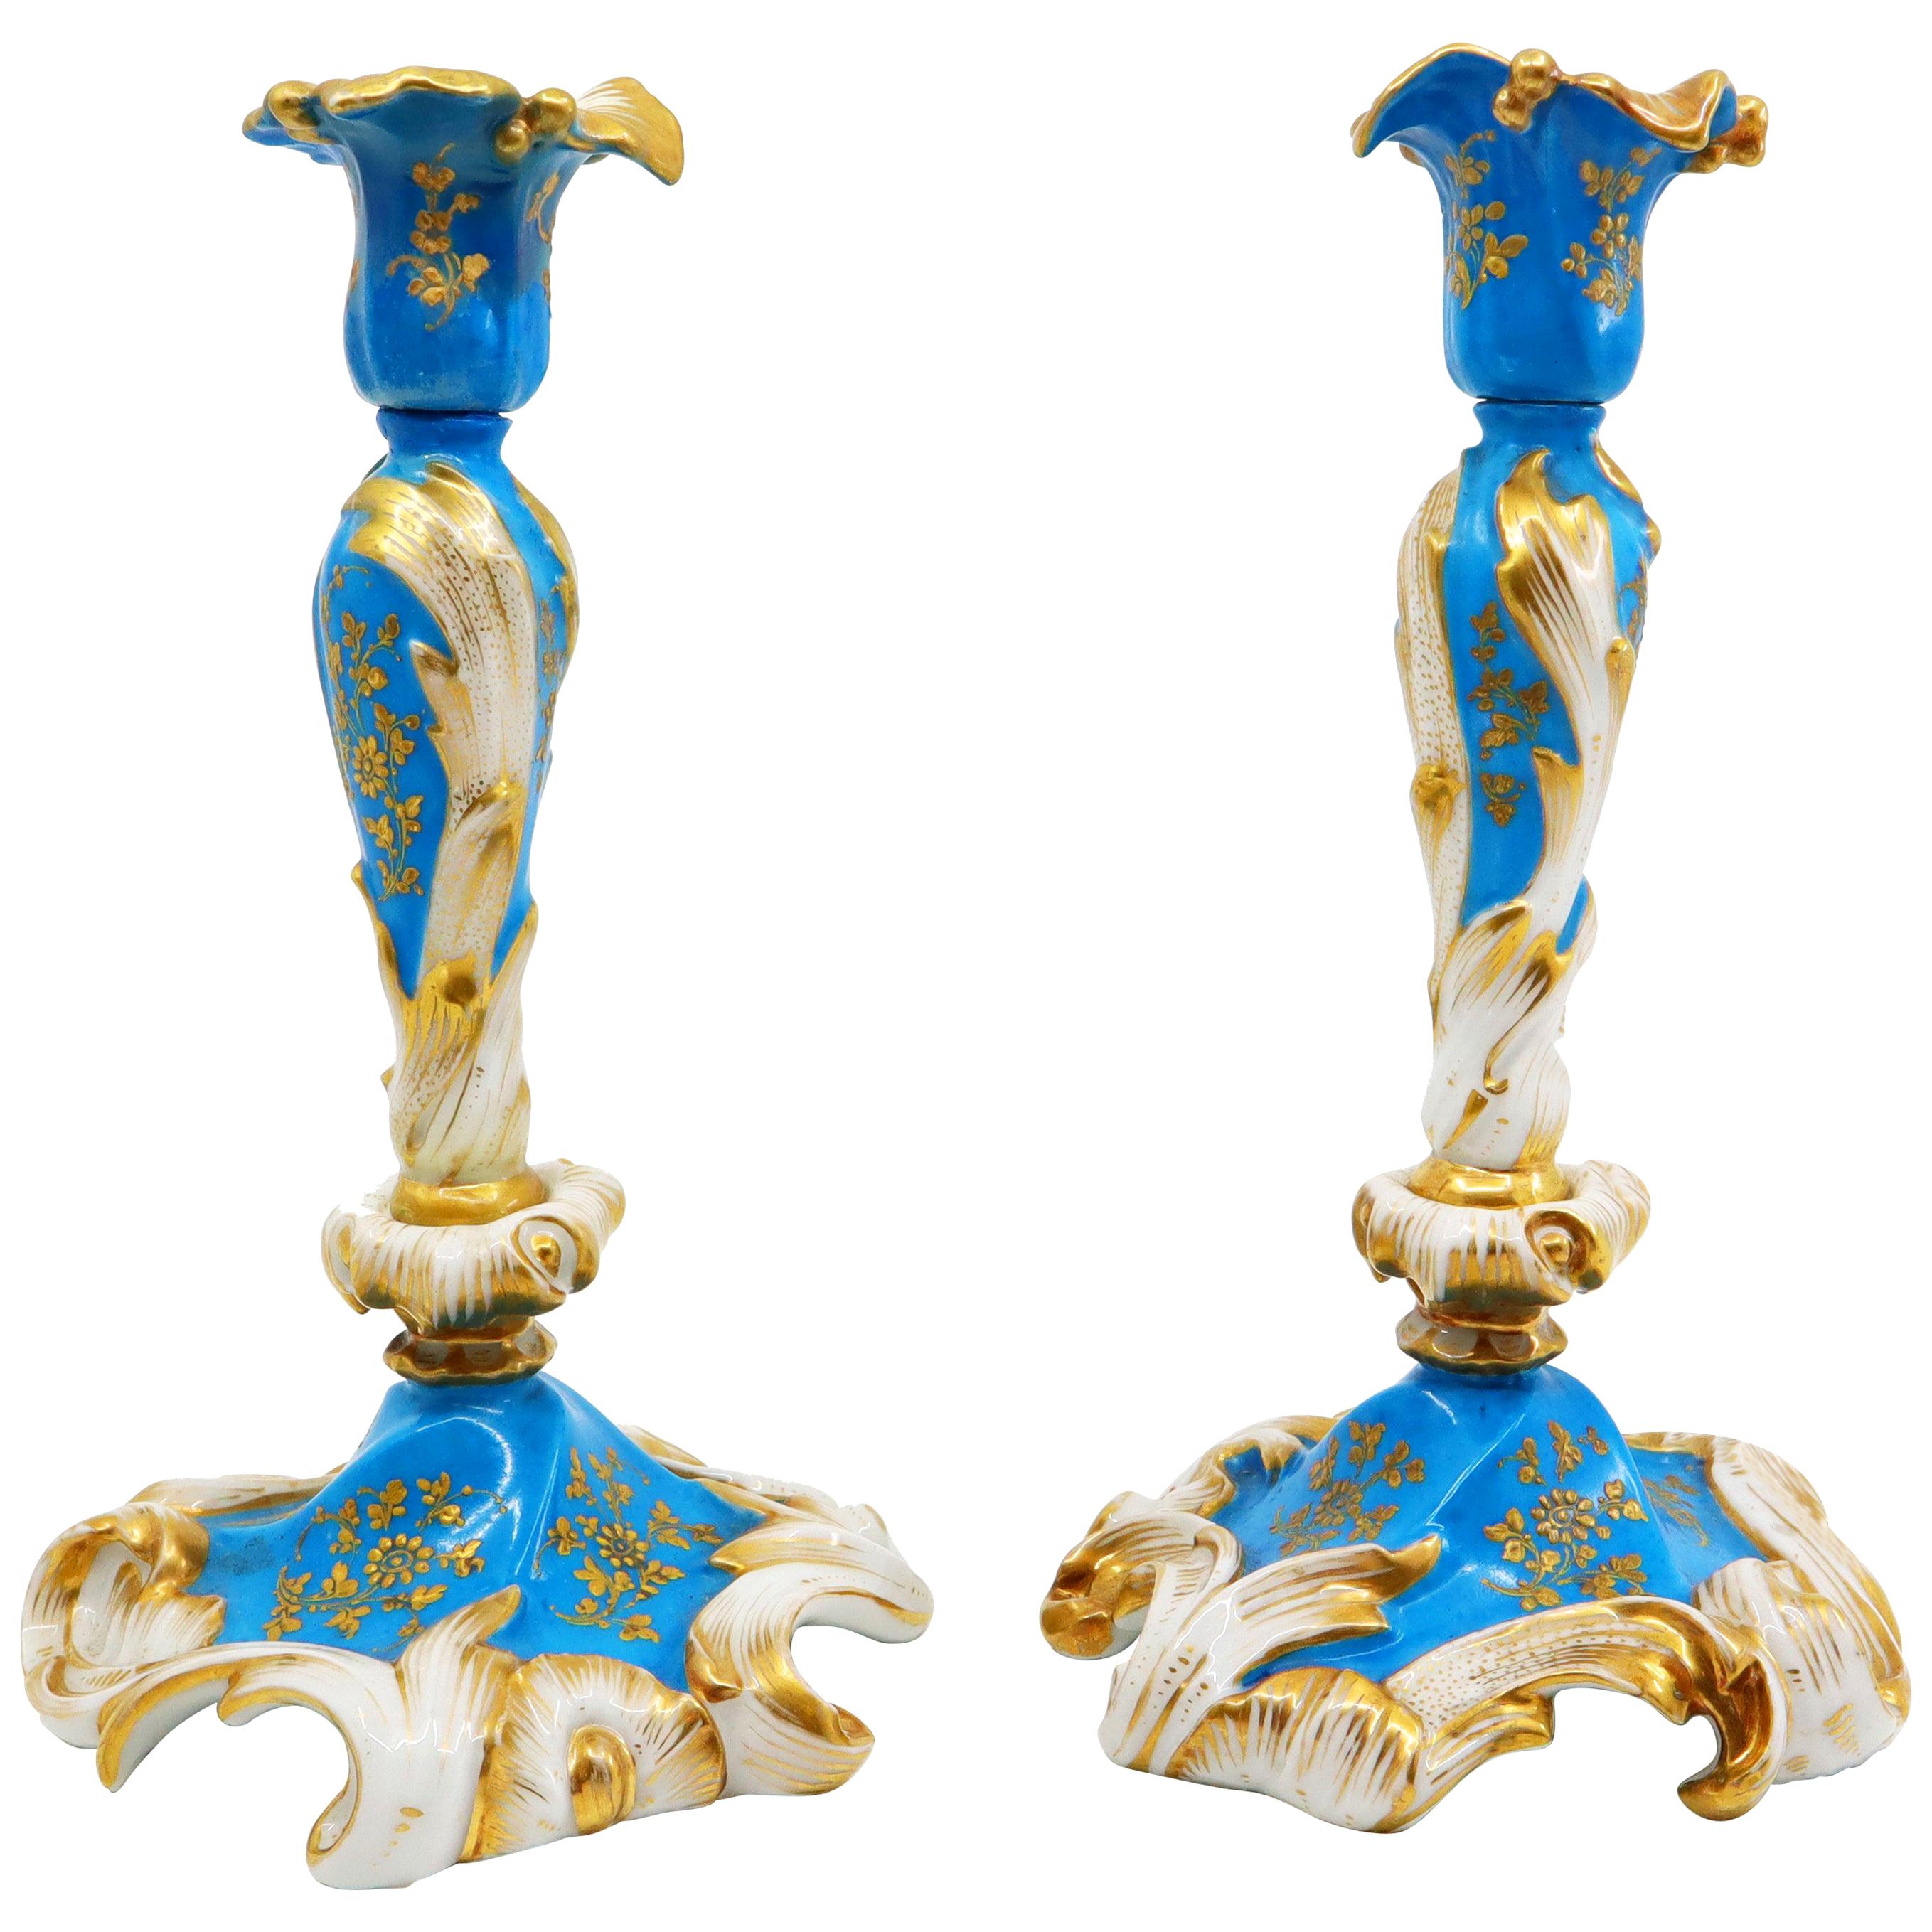 Pair of Candlesticks in Blue